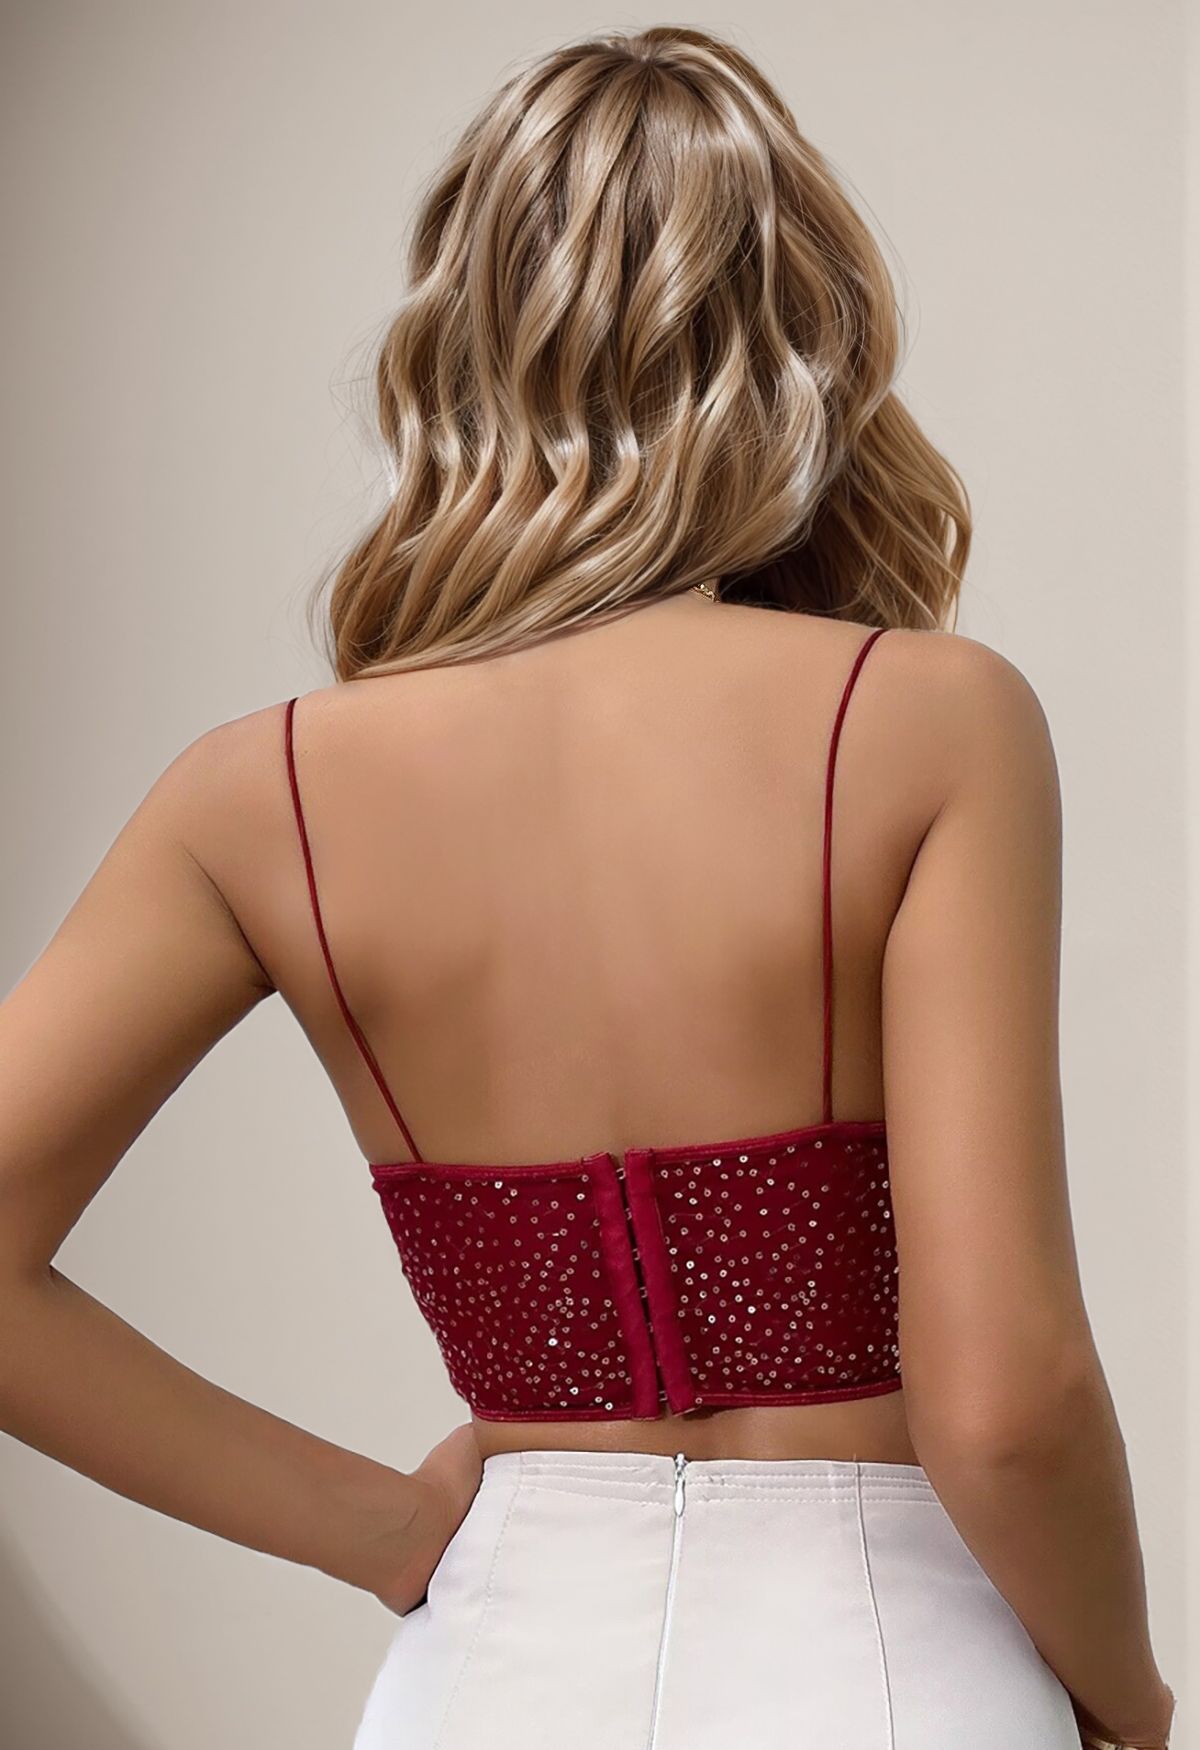 Sequin Embroidered Corset Bustier Top in Burgundy